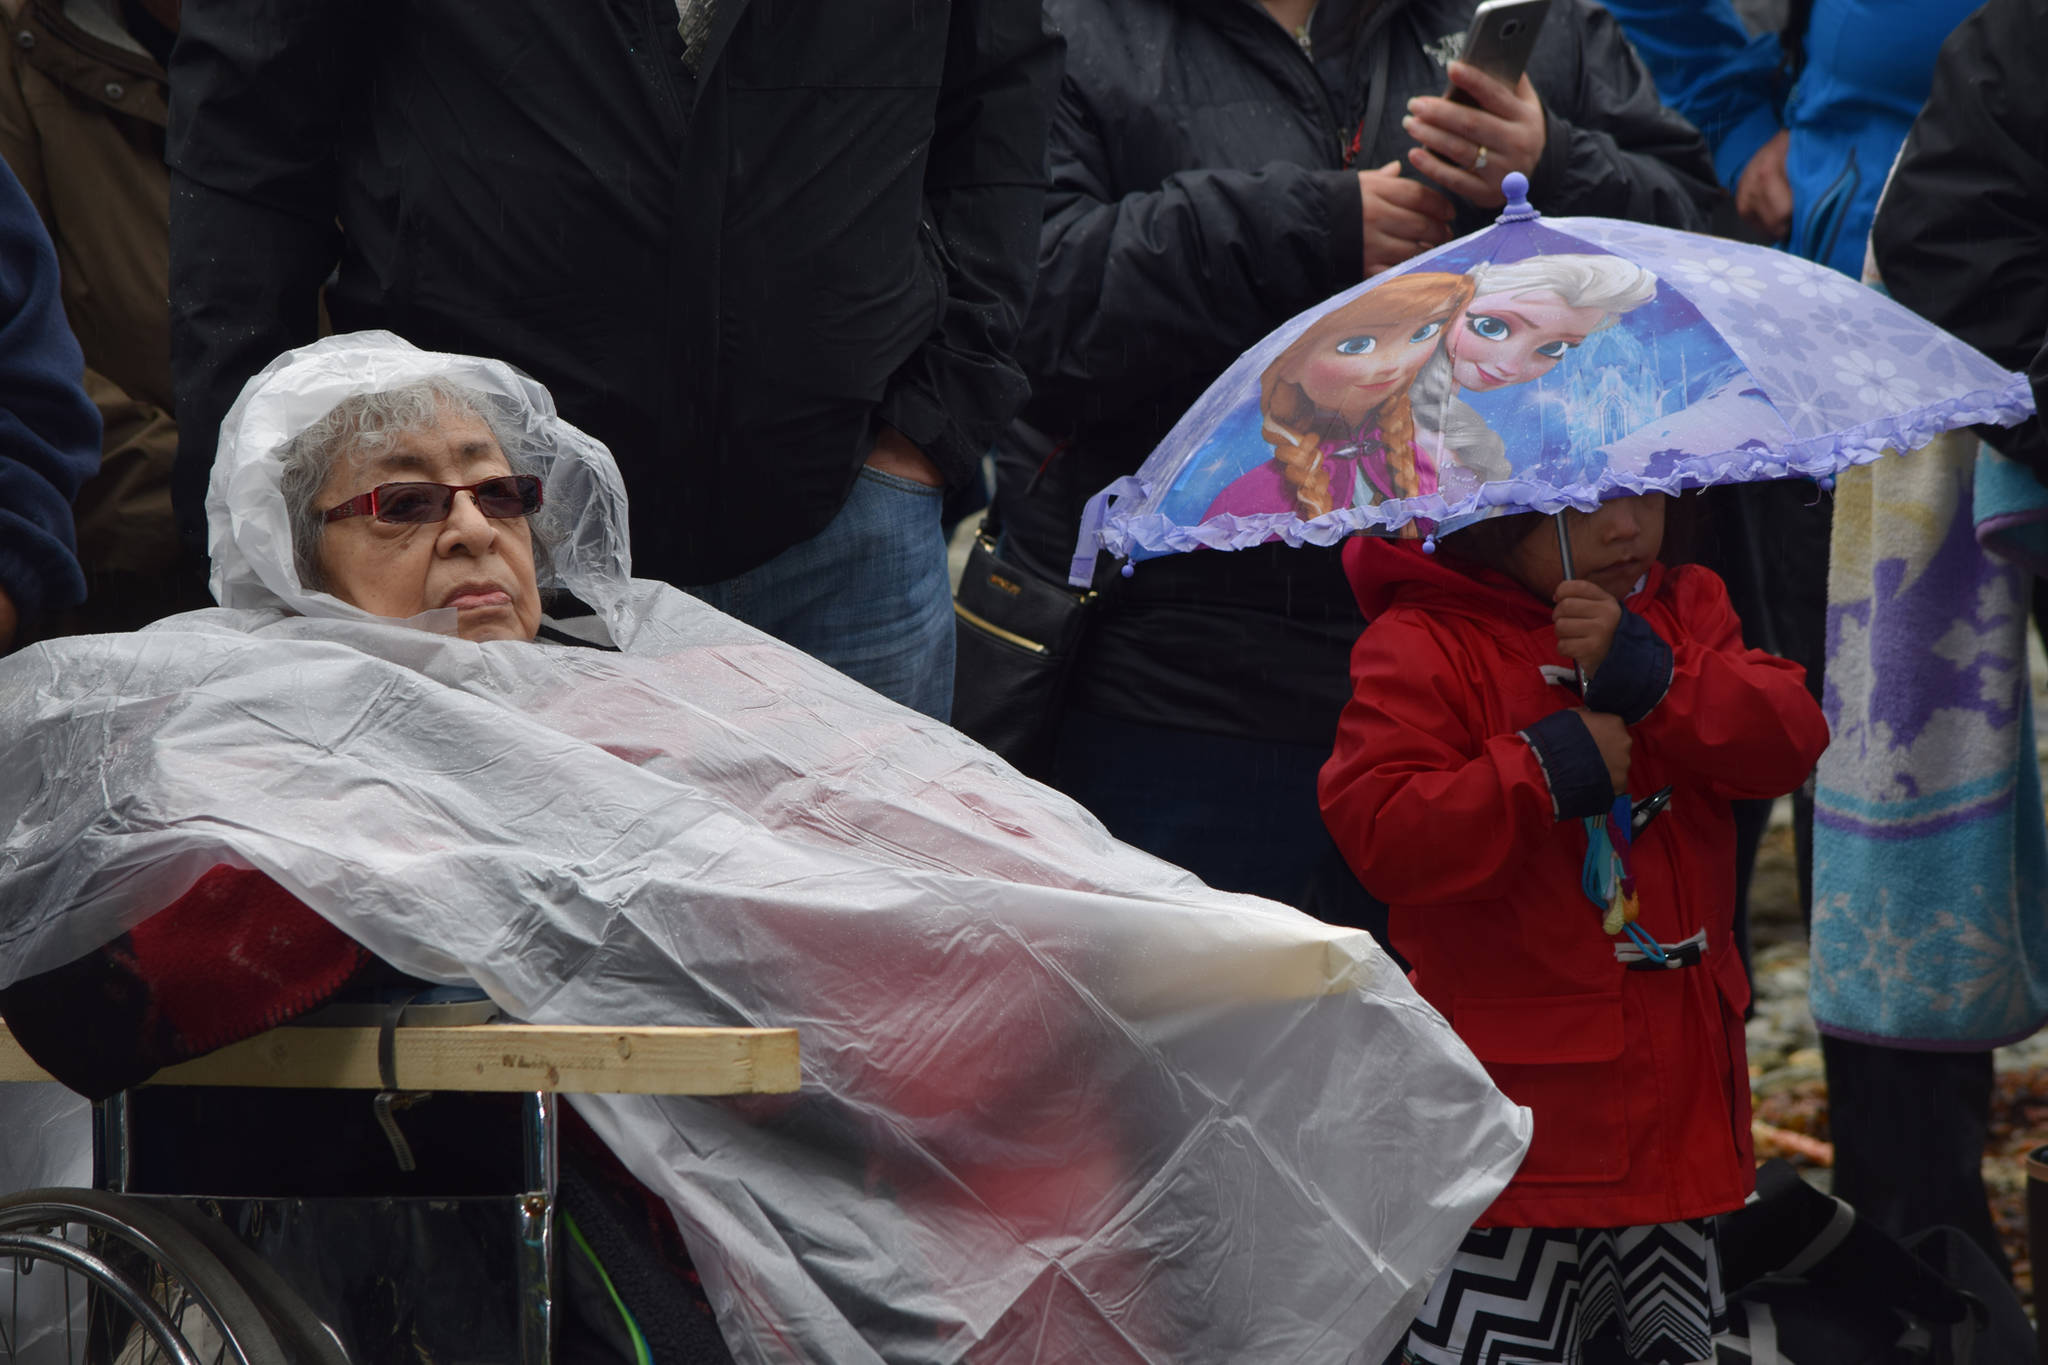 Harentina Krukoff and her great-granddaughter are seen during the ceremony in Funter Bay. (Kevin Gullufsen | Juneau Empire) Survivors, friends and family visit the Funter Bay internment camp on Saturday where of hundreds of Aleutian and Pribiloff Island Alaska Natives were held during WWII. (Kevin Gullufsen | Juneau Empire)